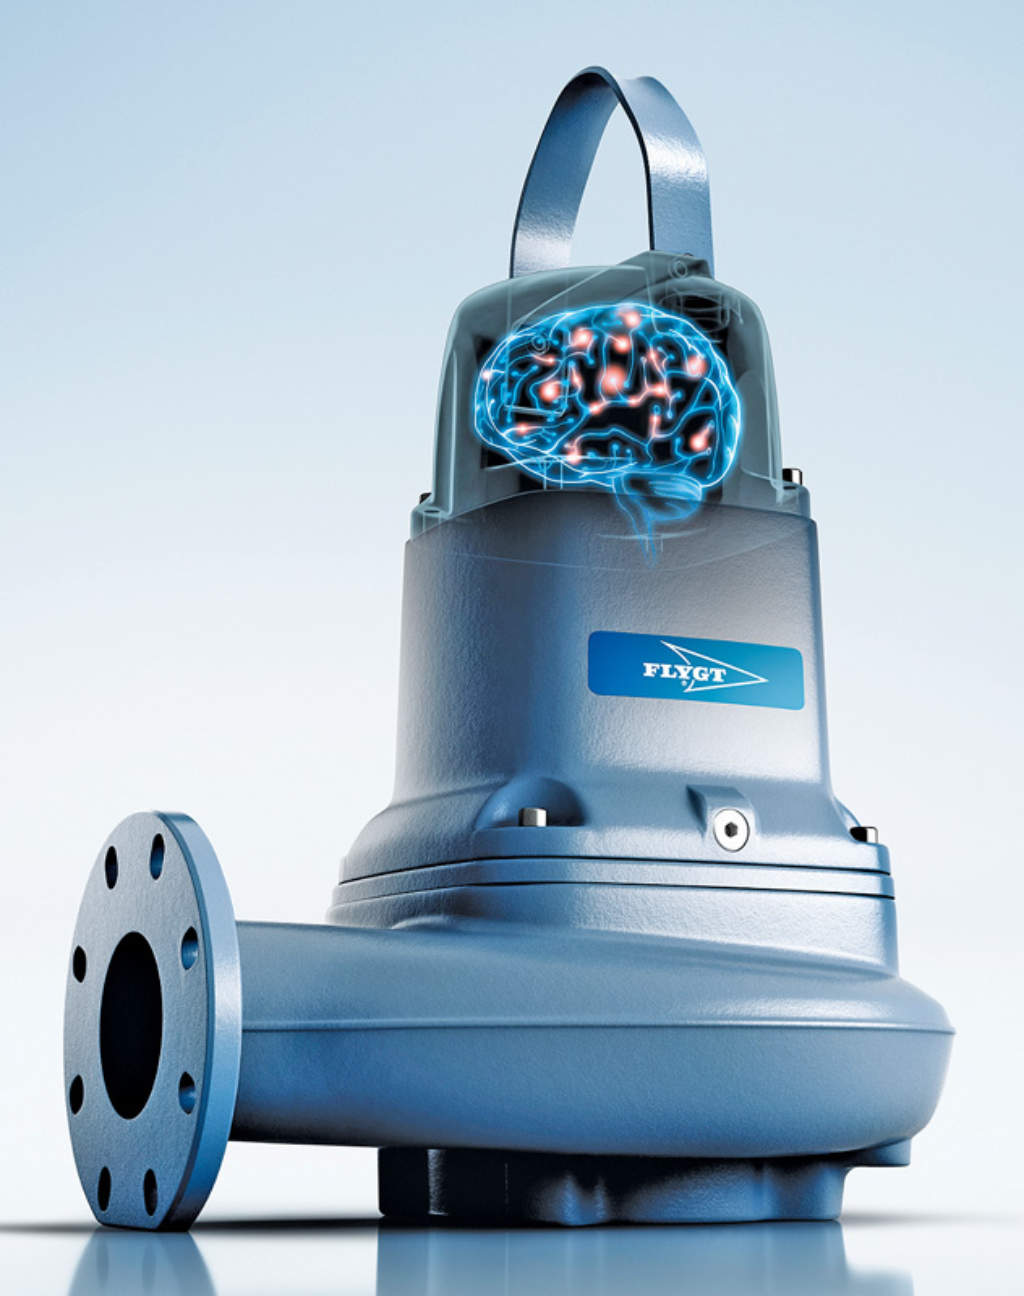 WE PARTNER WITH FLYGT TO PROVIDE NEXT GENERATION INTELLIGENT PUMPING